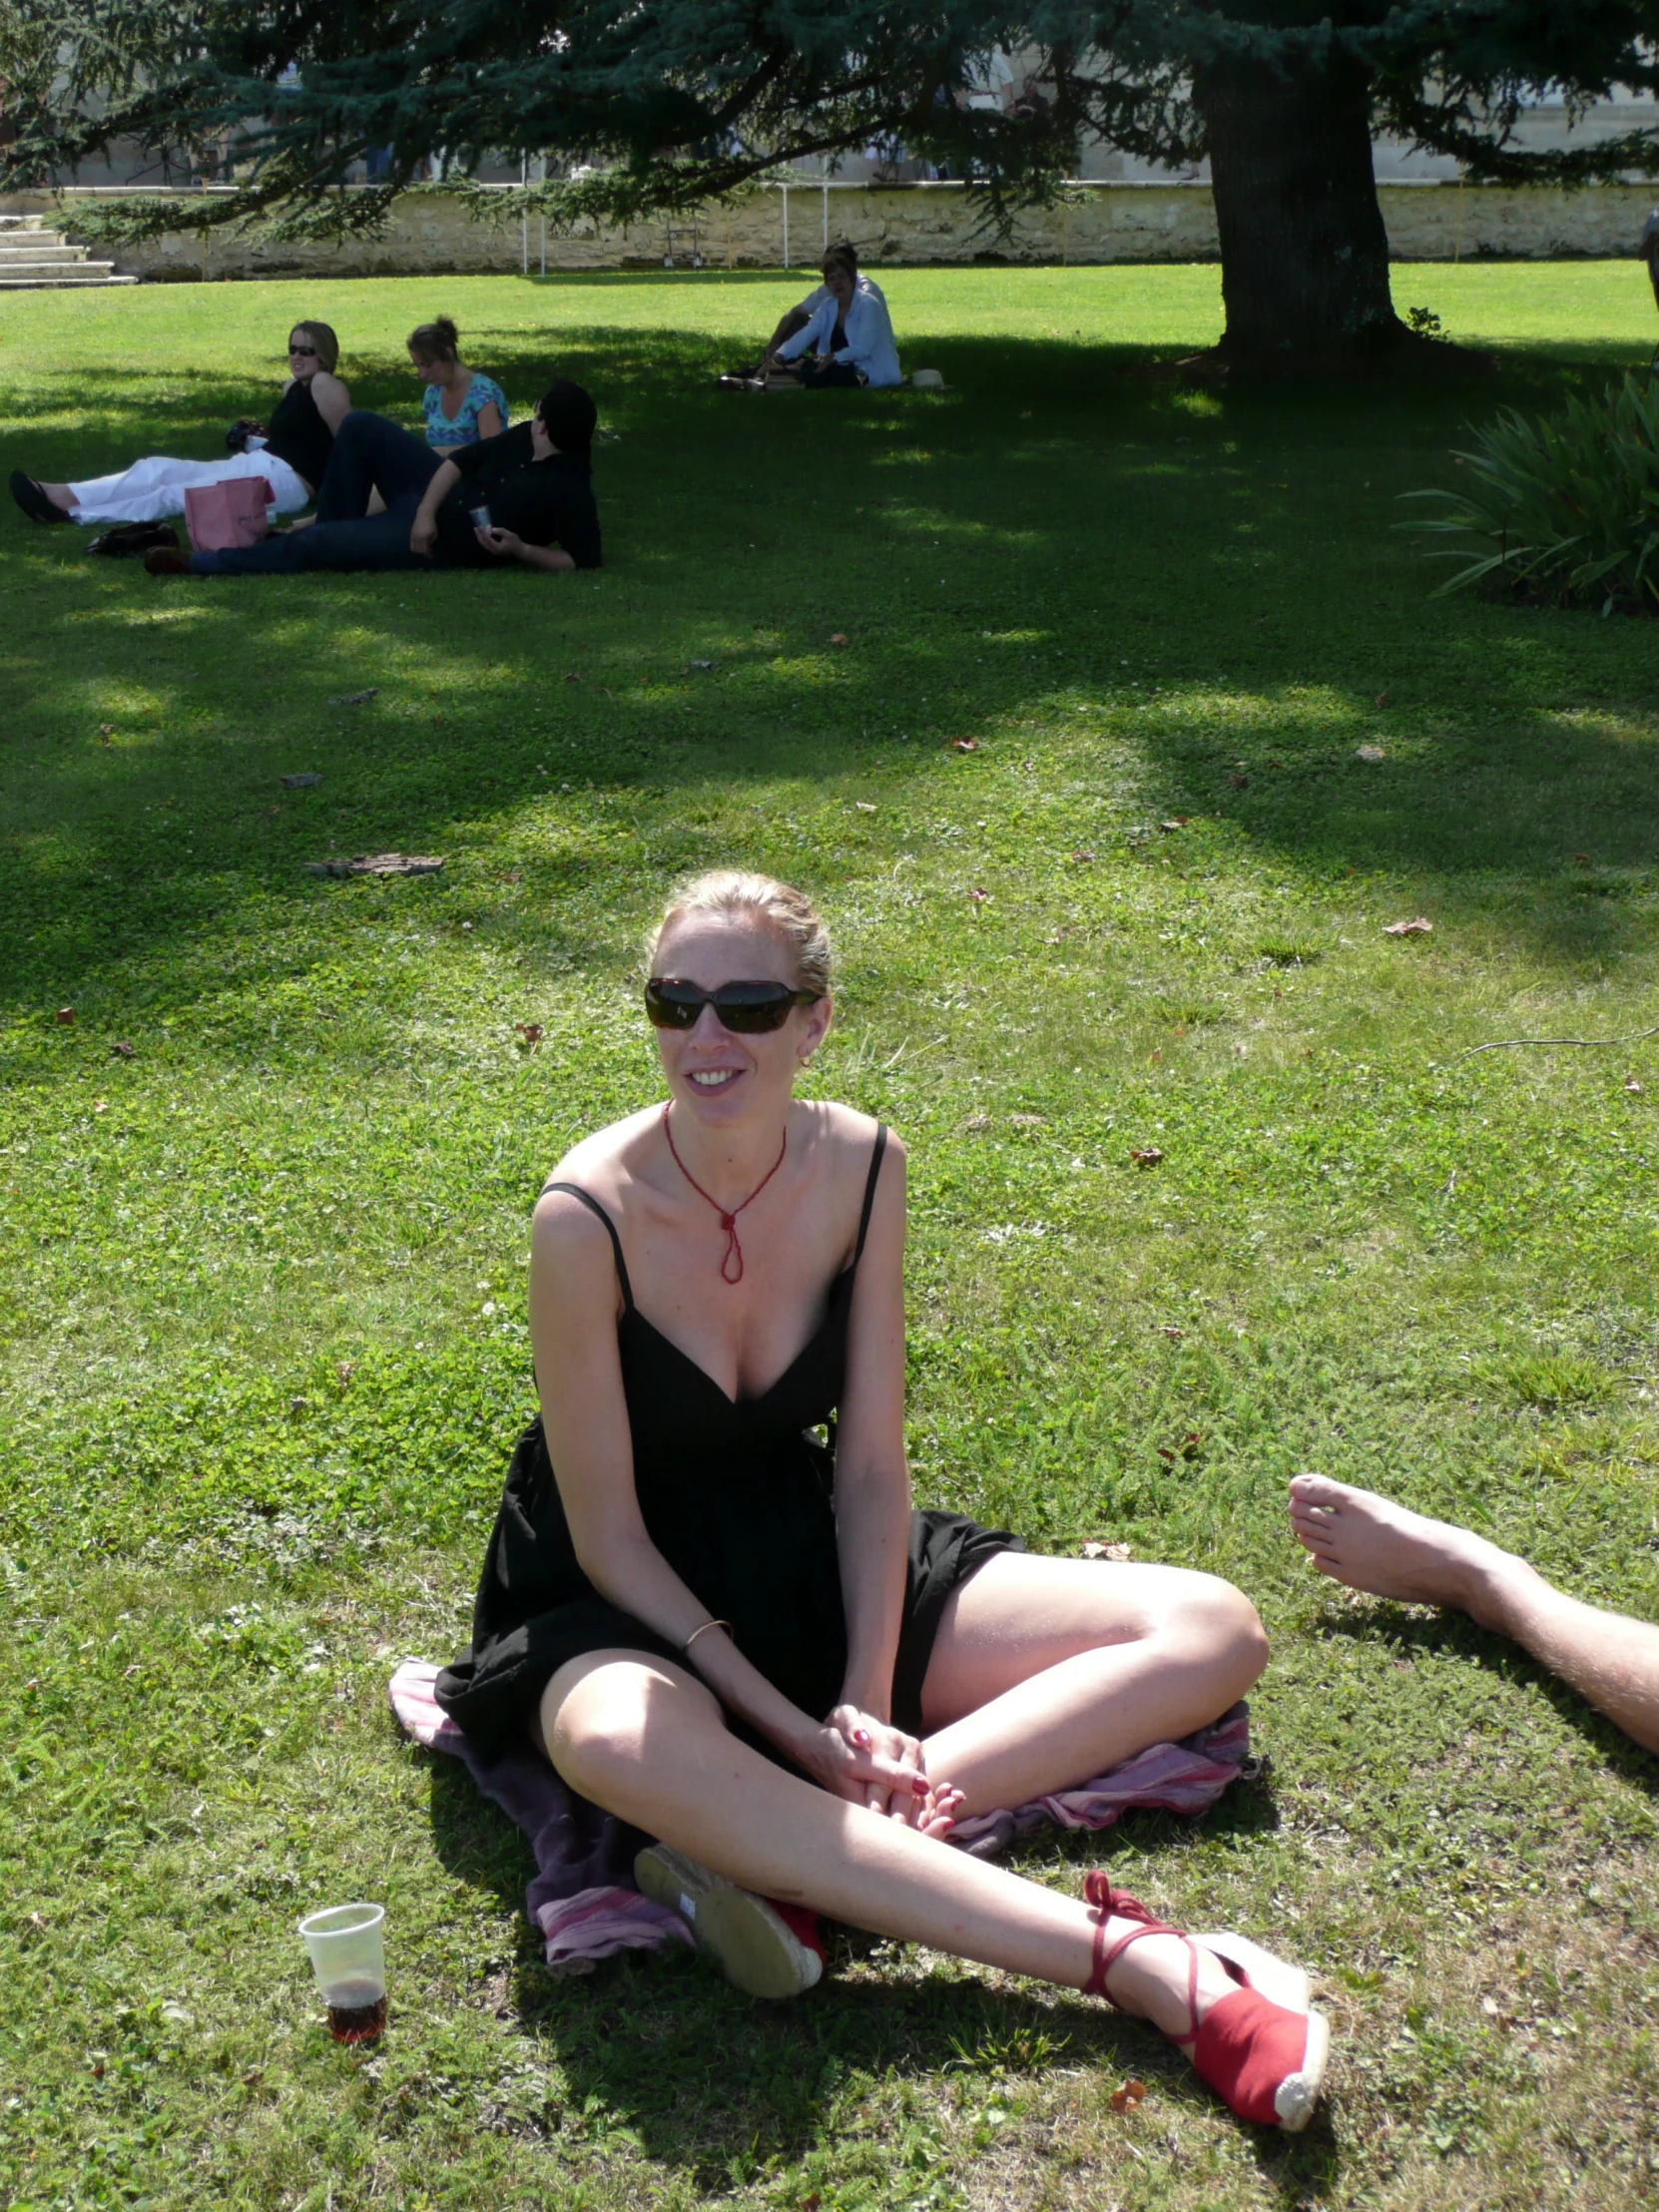 a woman sits in the grass on her back while others lounge on the ground